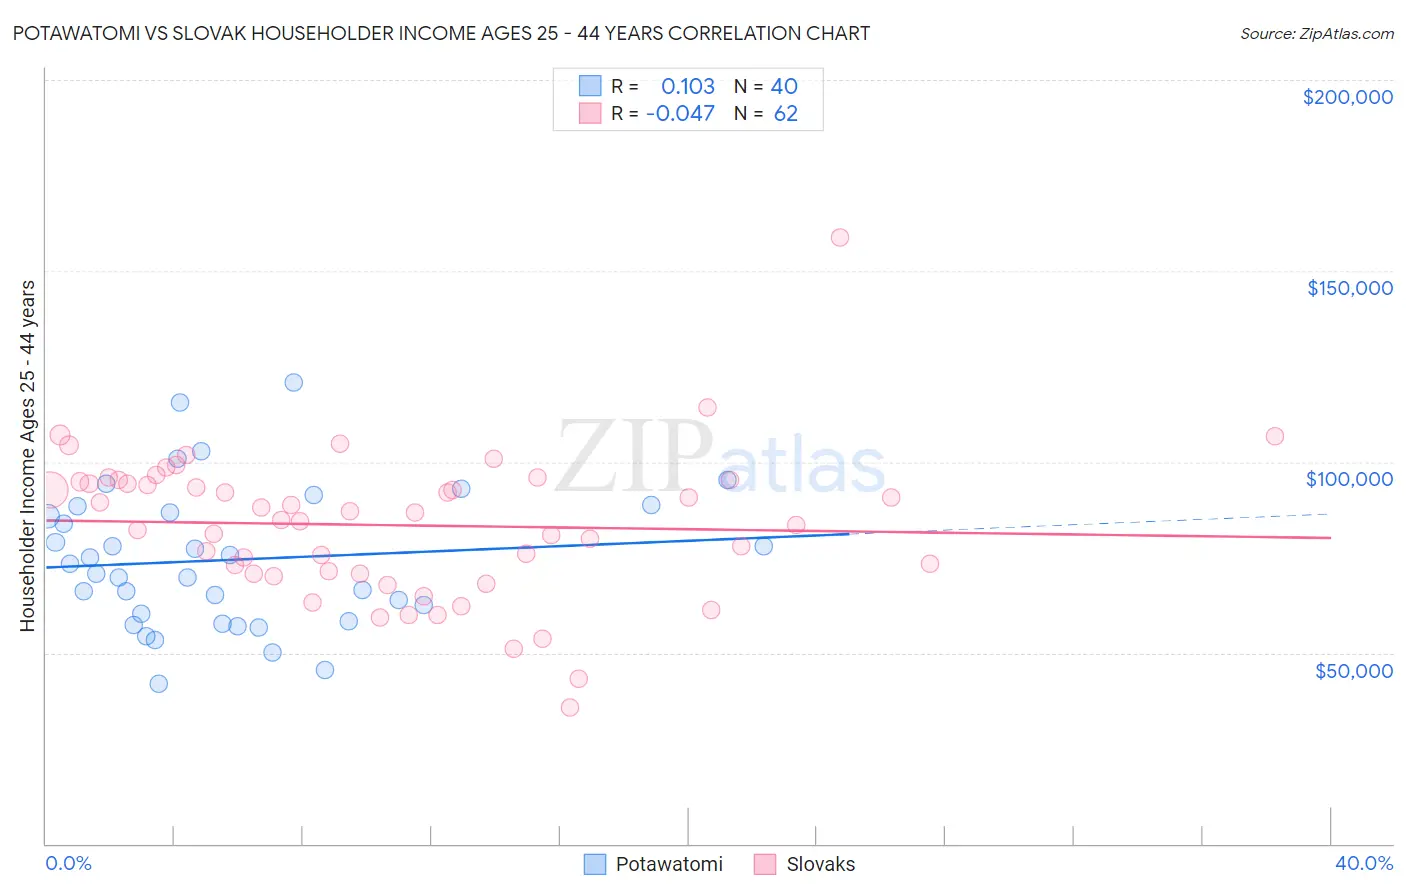 Potawatomi vs Slovak Householder Income Ages 25 - 44 years